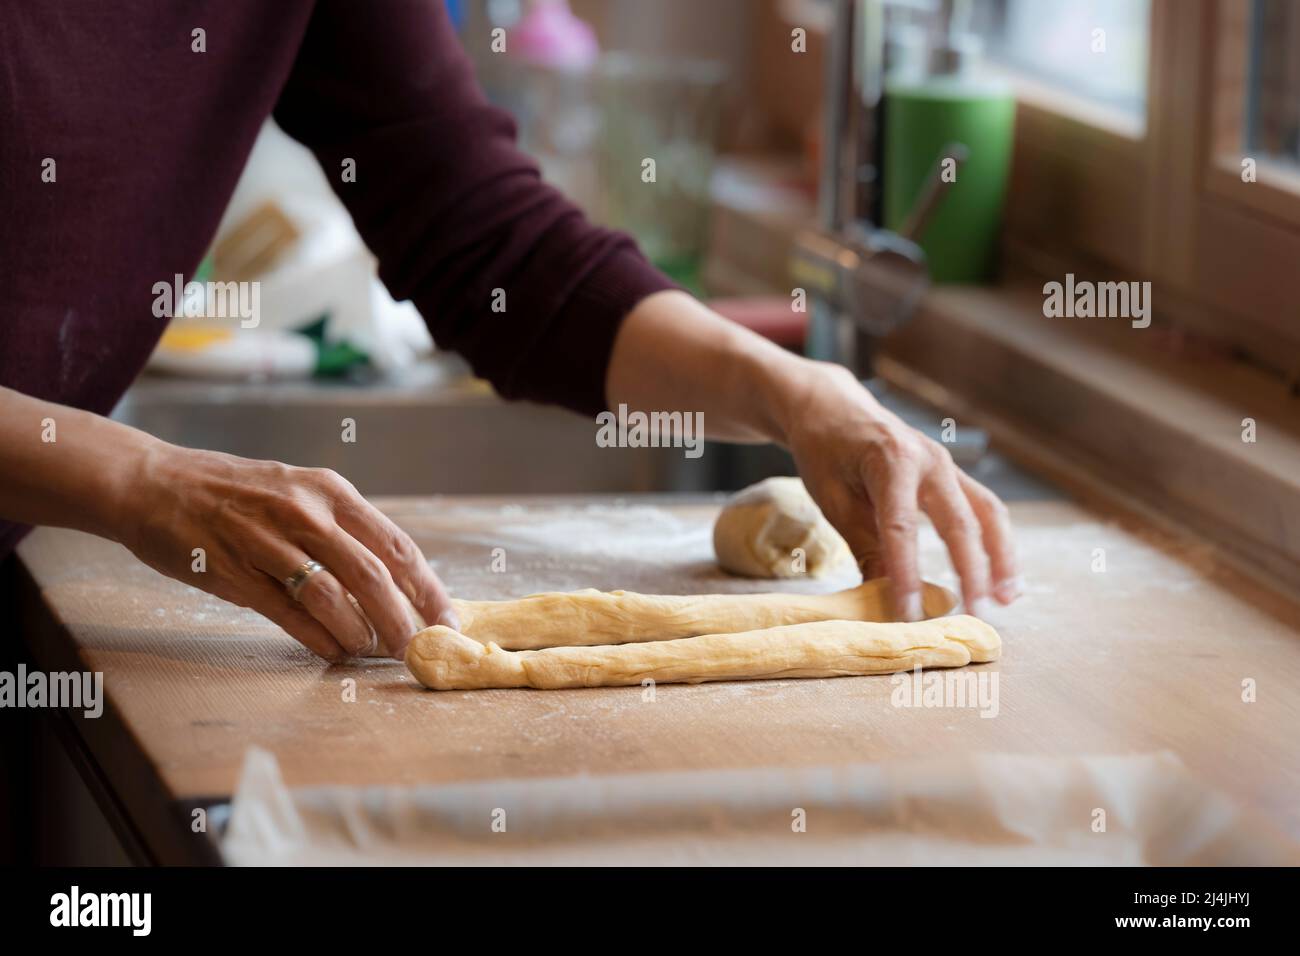 female hands roll and shape dough to bake an easter braid Stock Photo